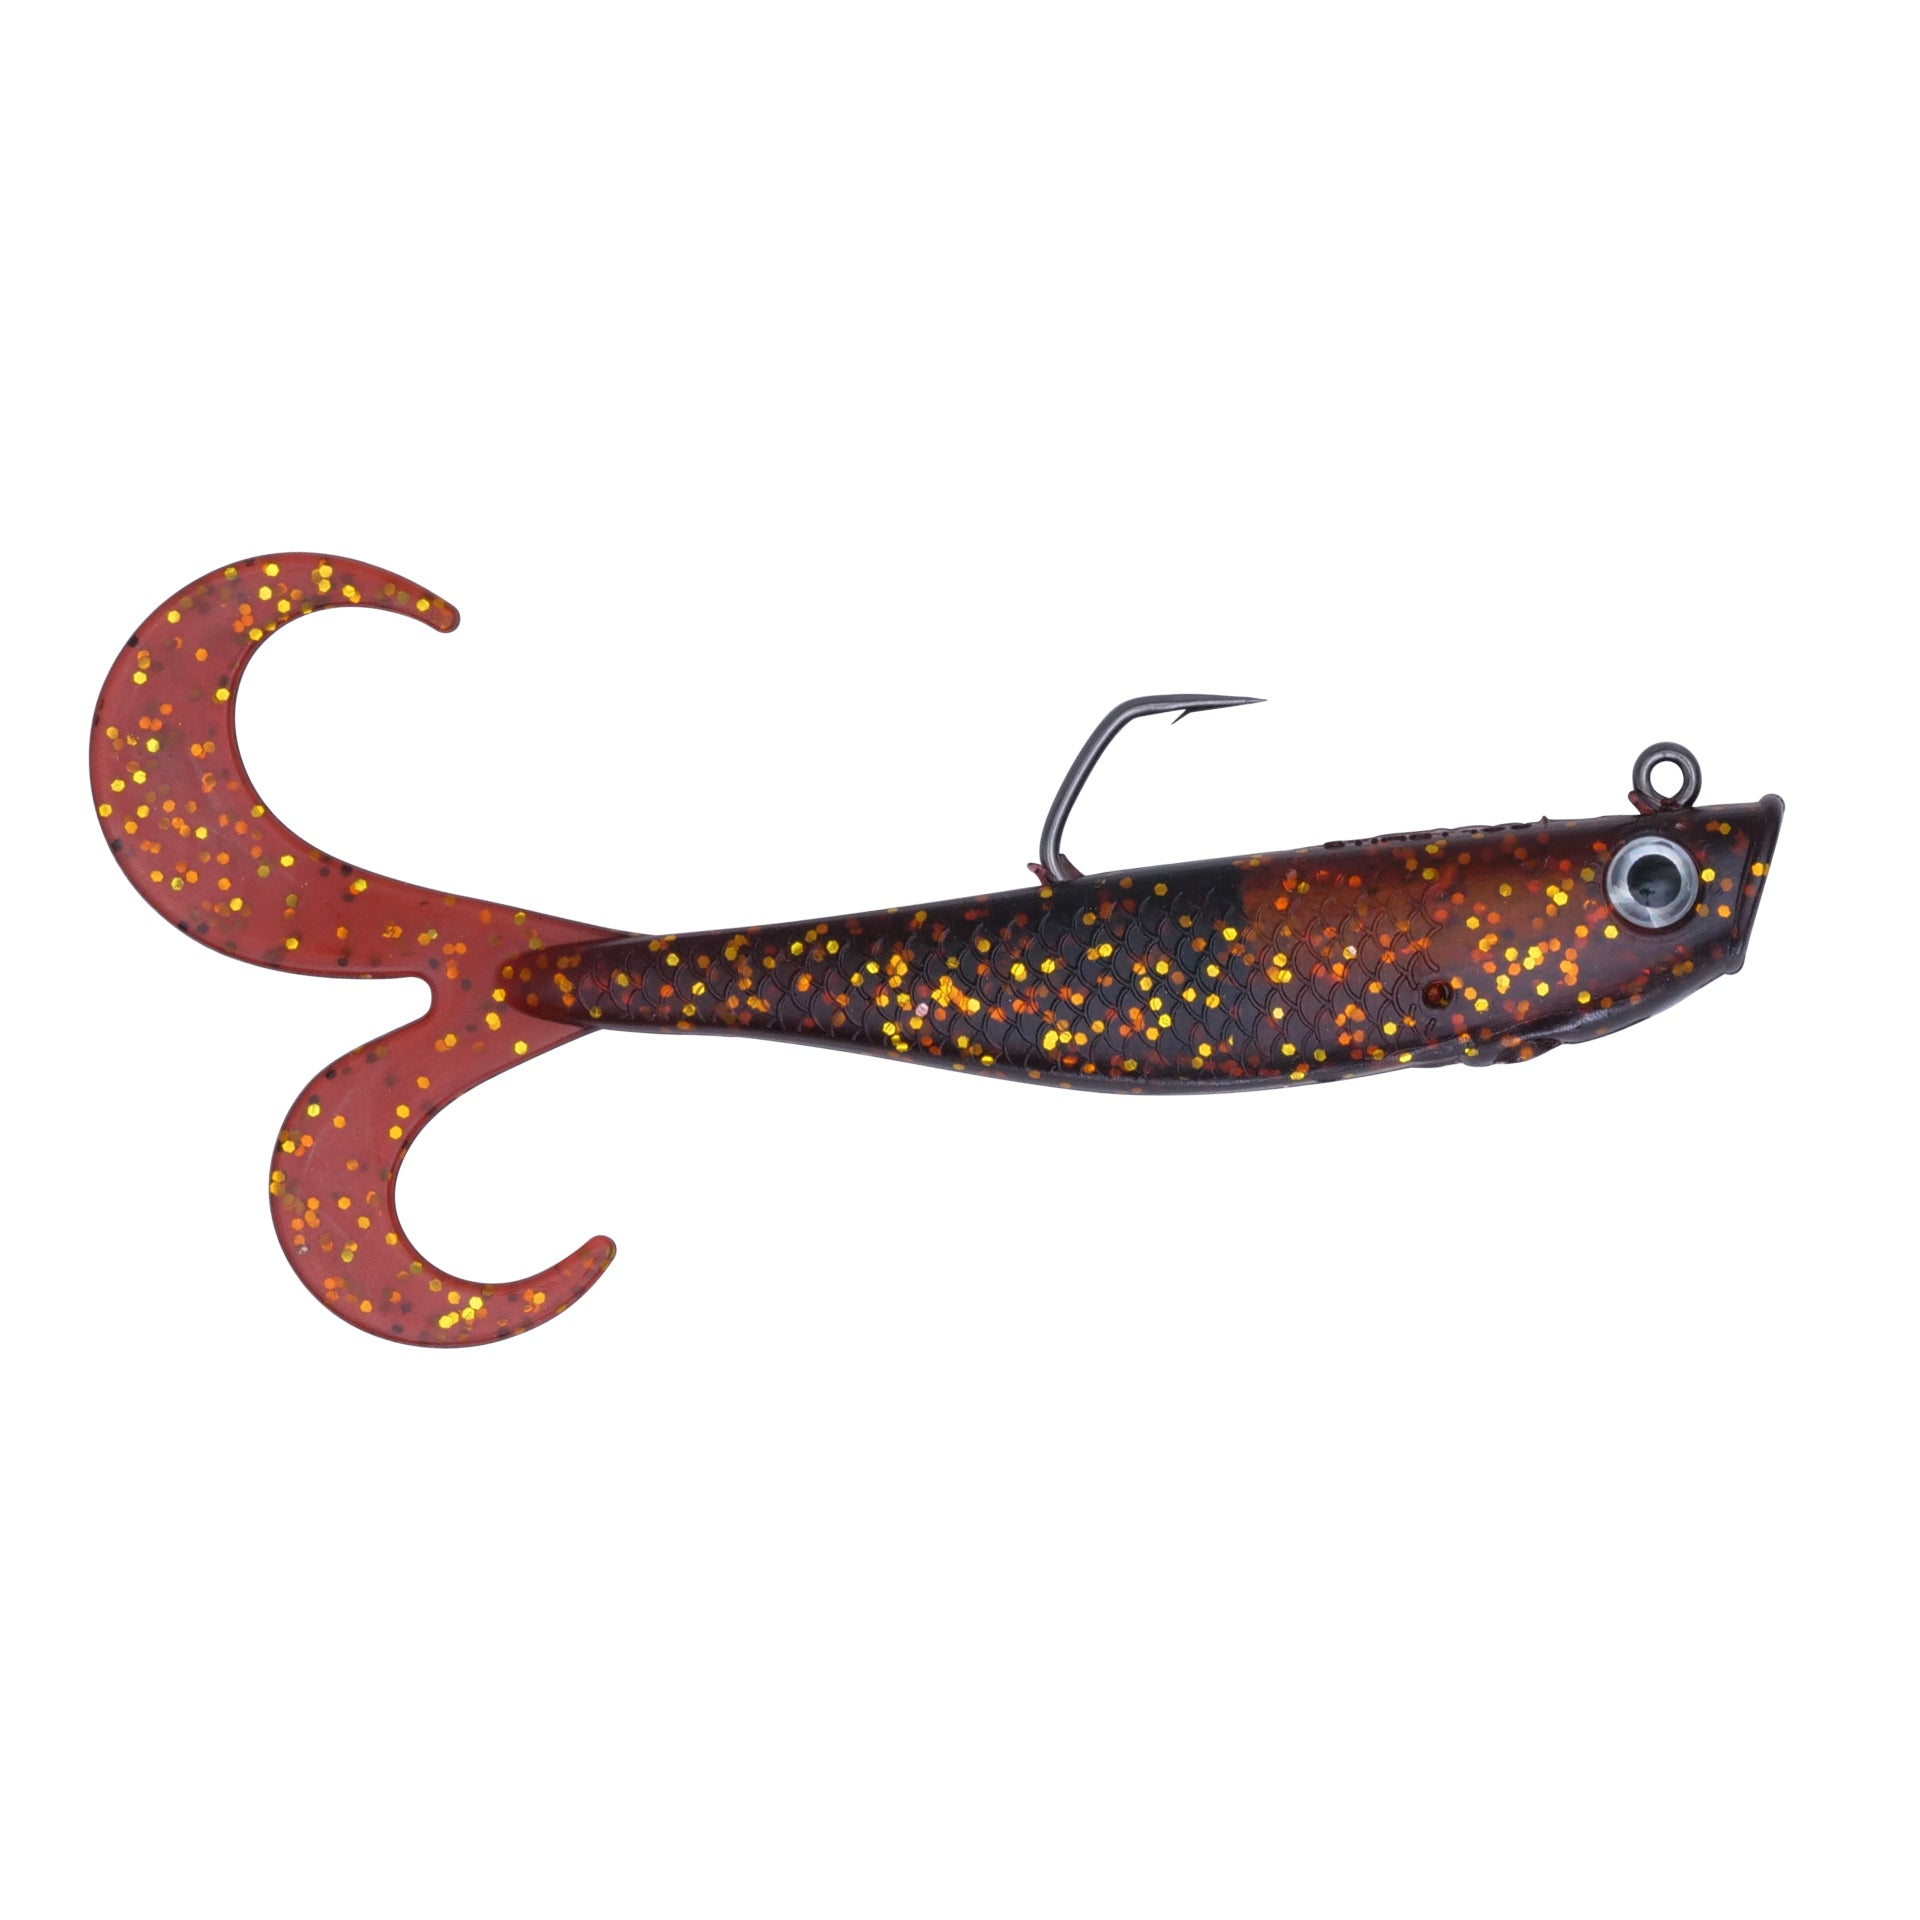 Fishing Accessories Slow Sinking SwimBaits Lures 30G Whopper Vibration Soft  Tail Or Pike And Bass Hard Baits Isca Artificiall 231030 From Ren05, $8.58